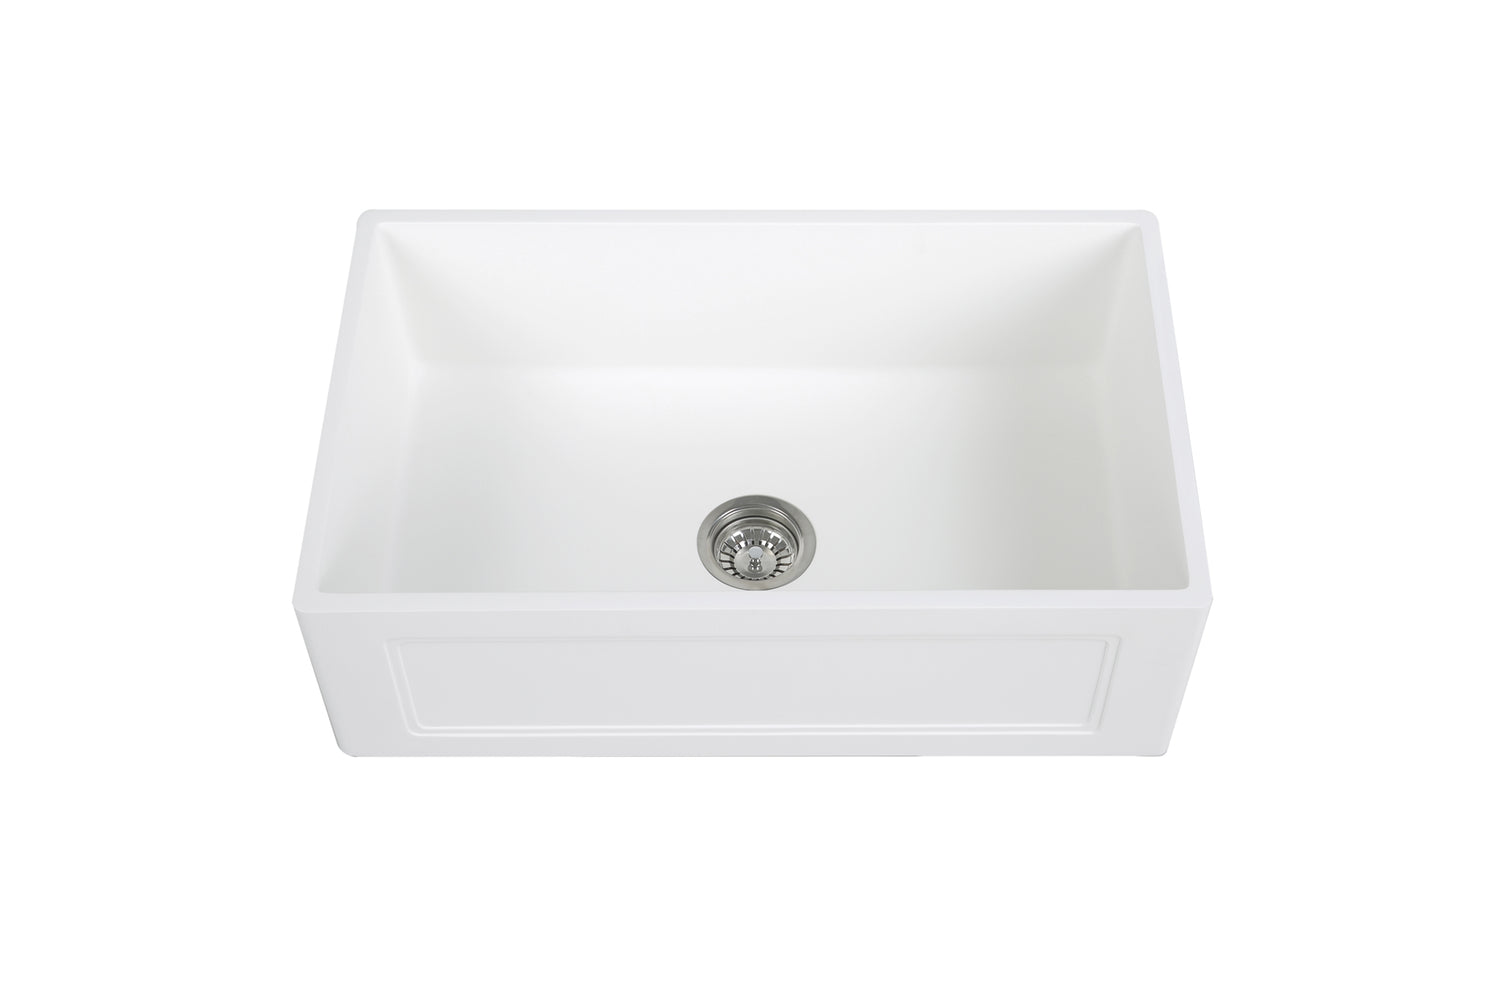 30'' Streamline K-1830-KS-30ART Reversible Solid Surface Resin Kitchen Sink With Stainless Steel Grid and Strainer Image